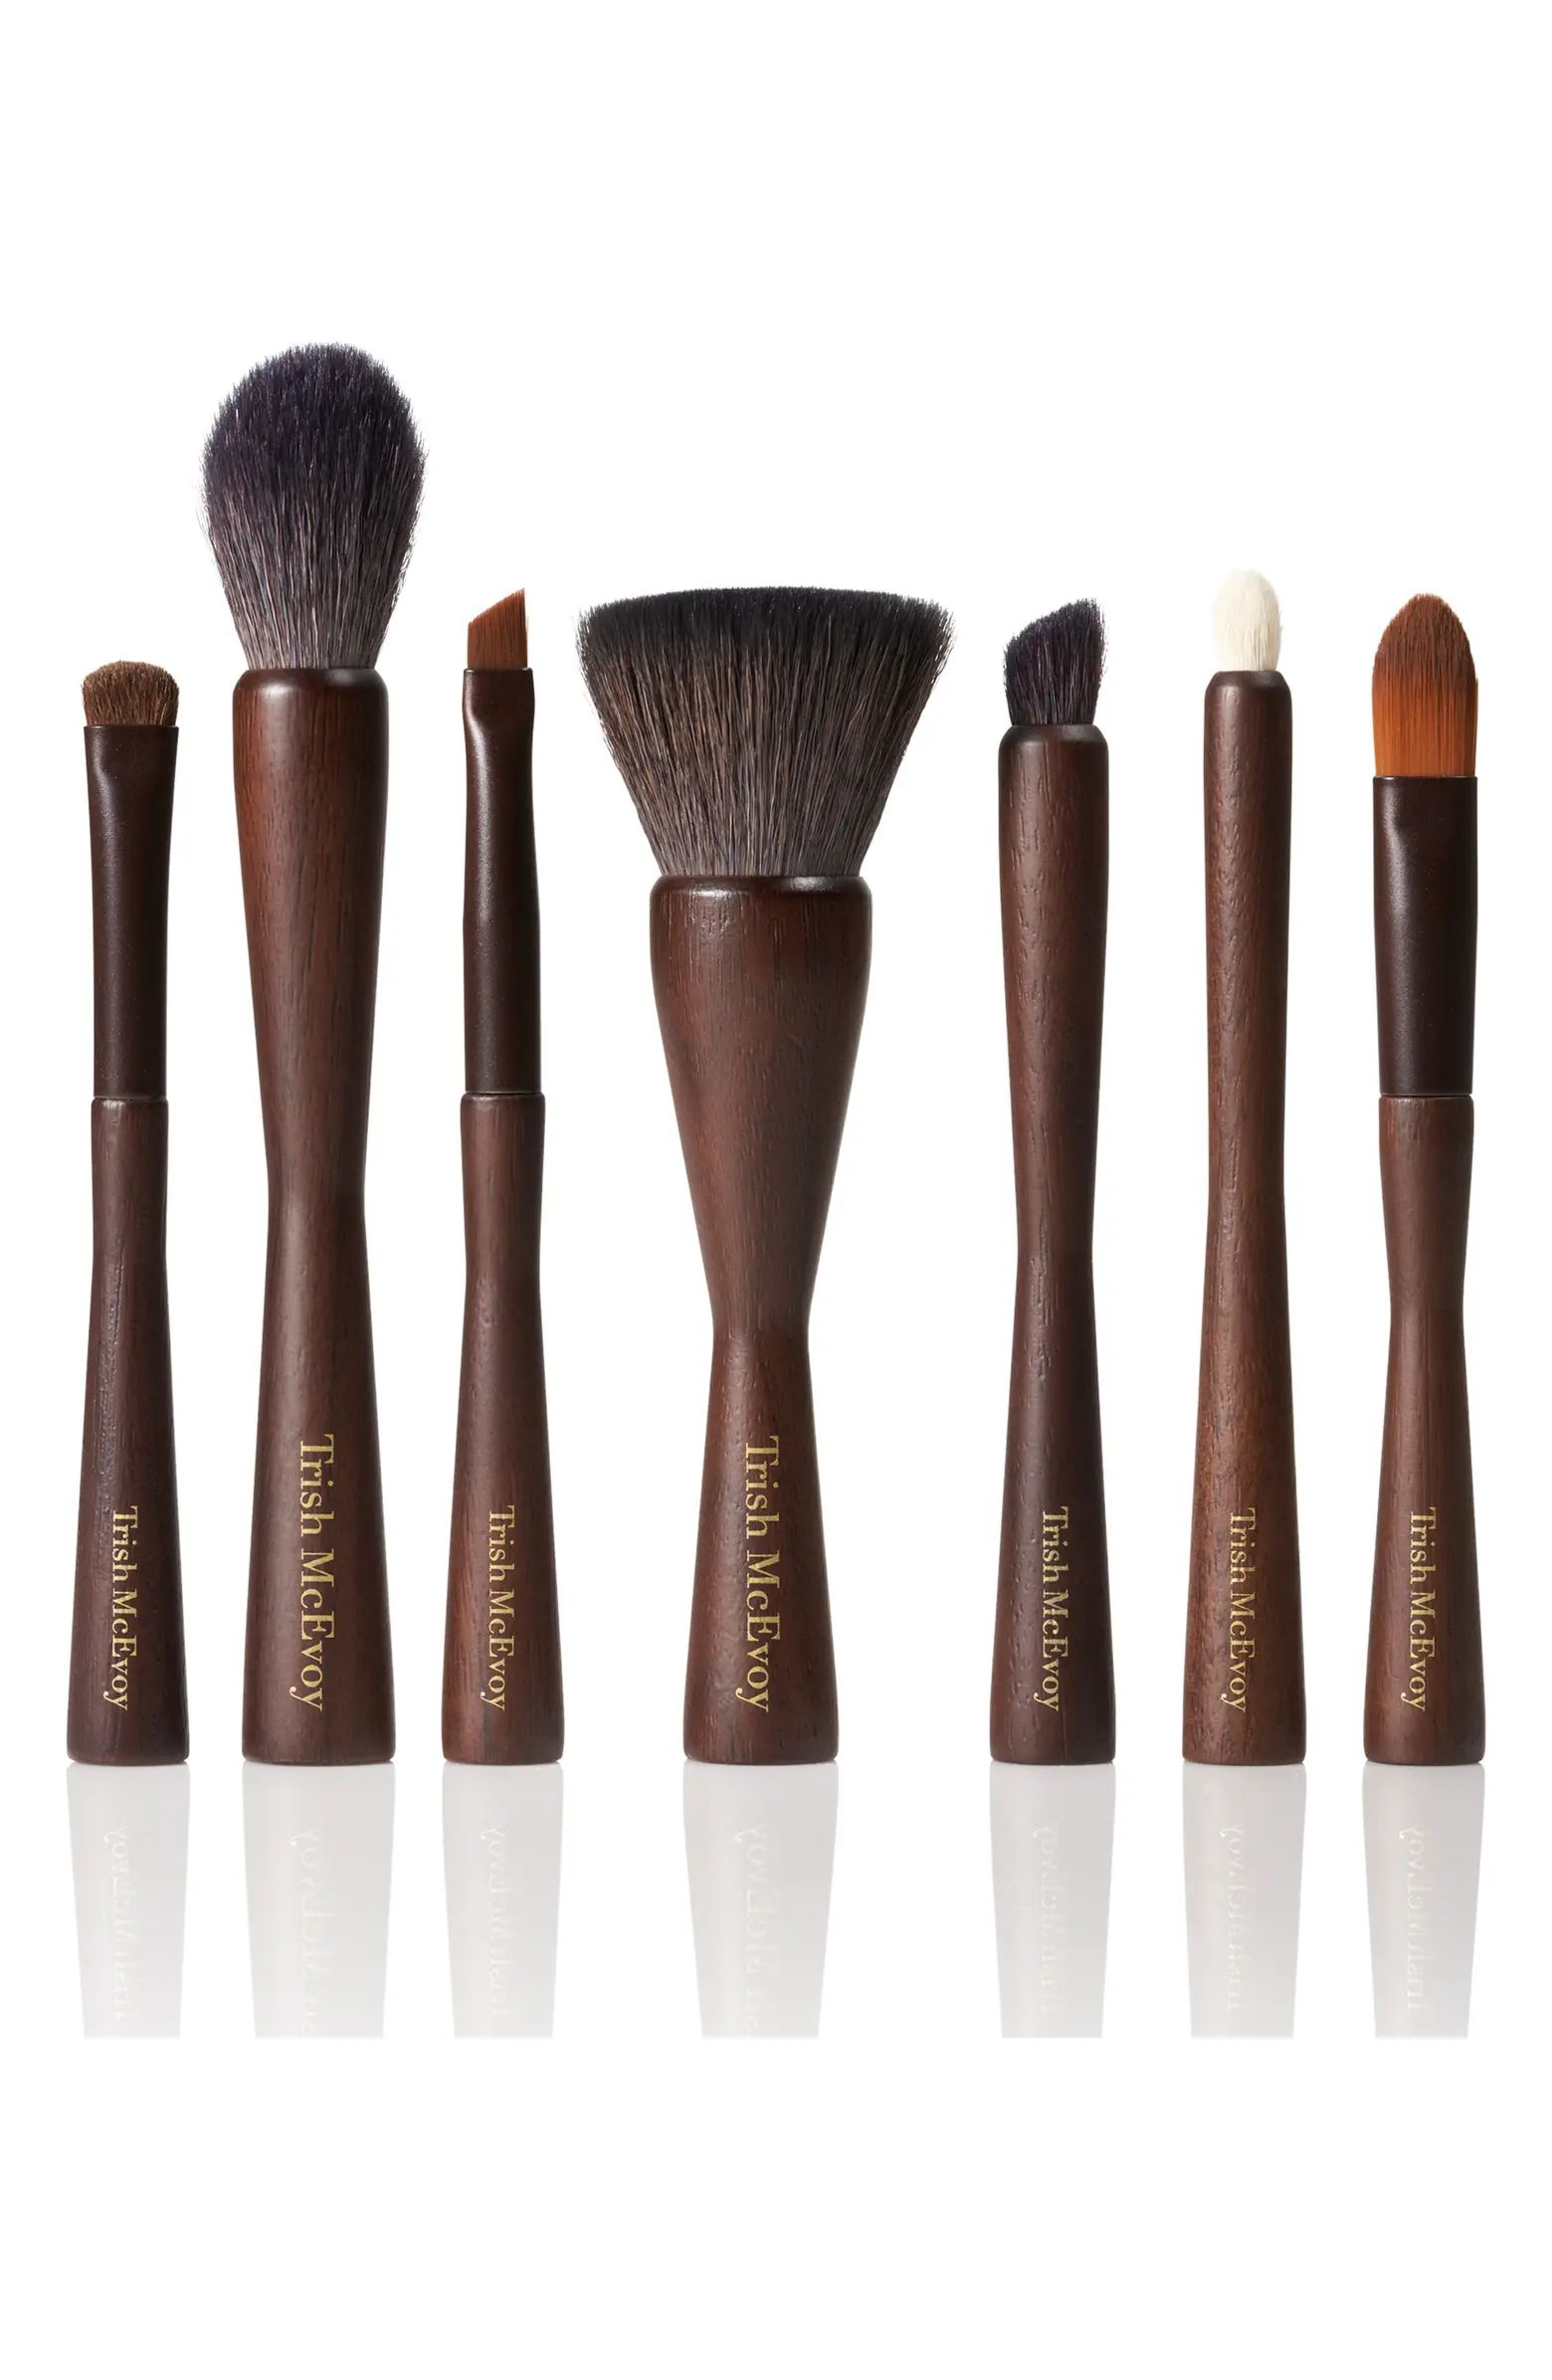 Trish McEvoy The Must Have Mini Luxe Brush Collection $300 Value | Nordstrom | Nordstrom